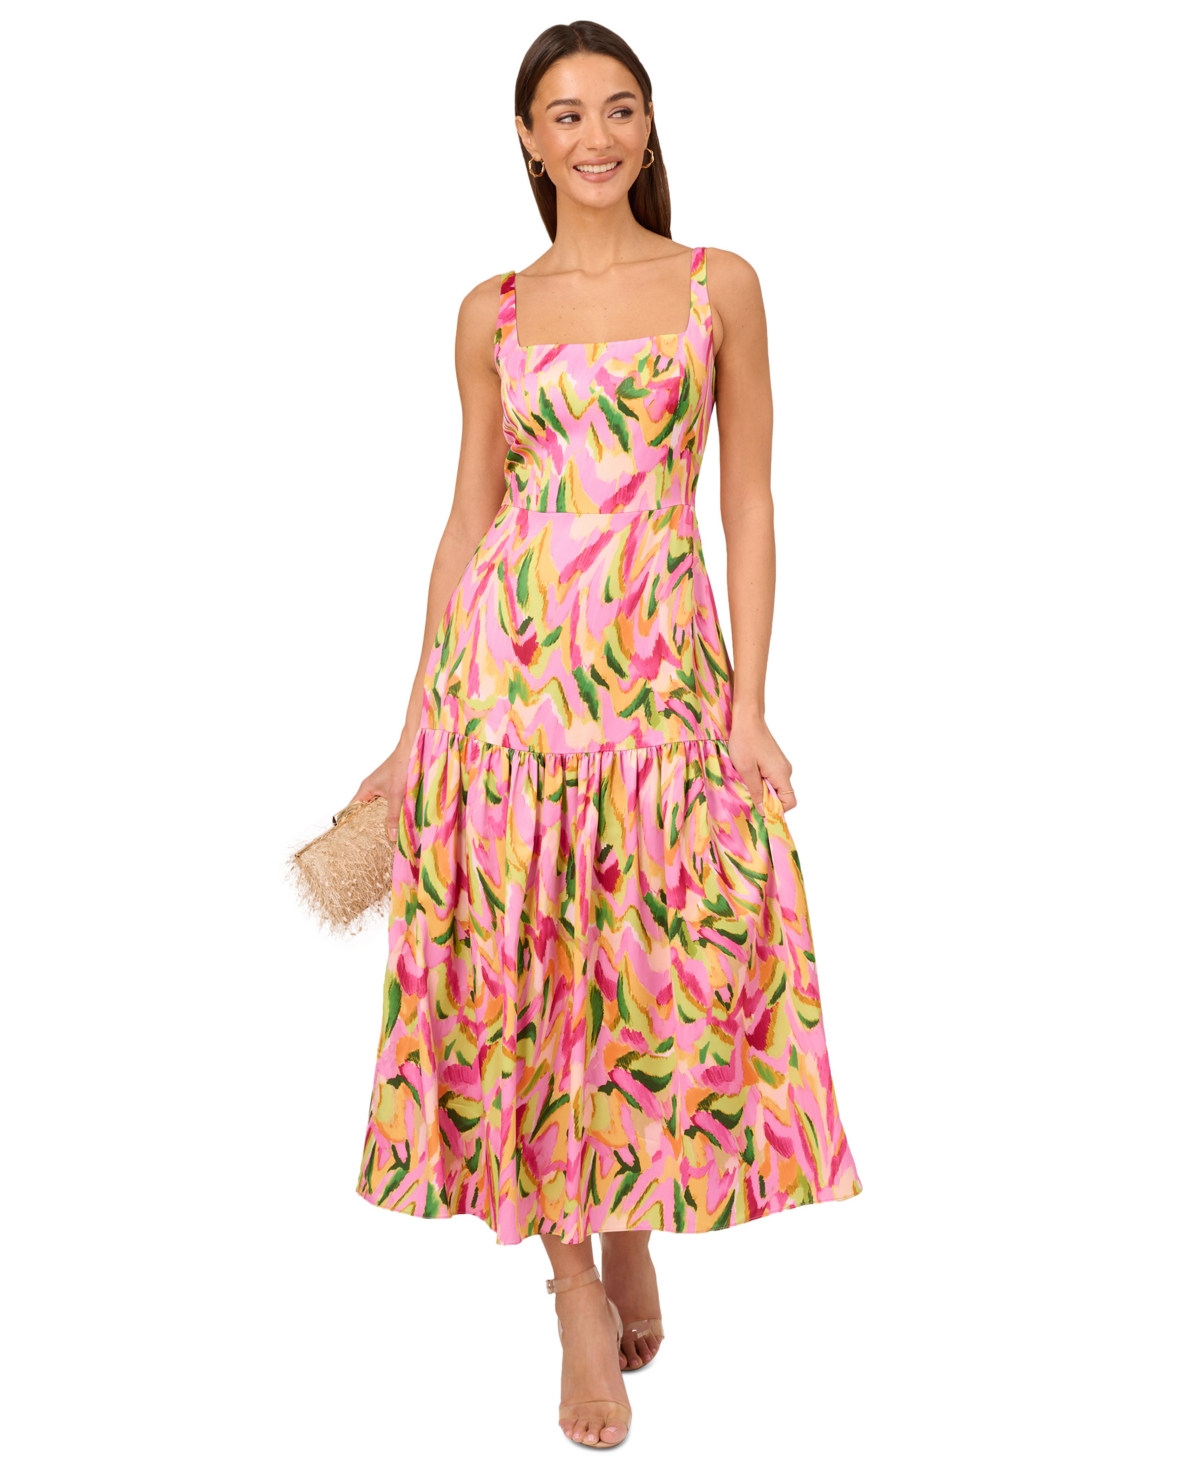 Adrianna By Adrianna Papell Women's Printed Fit & Flare Dress In Pink Multi